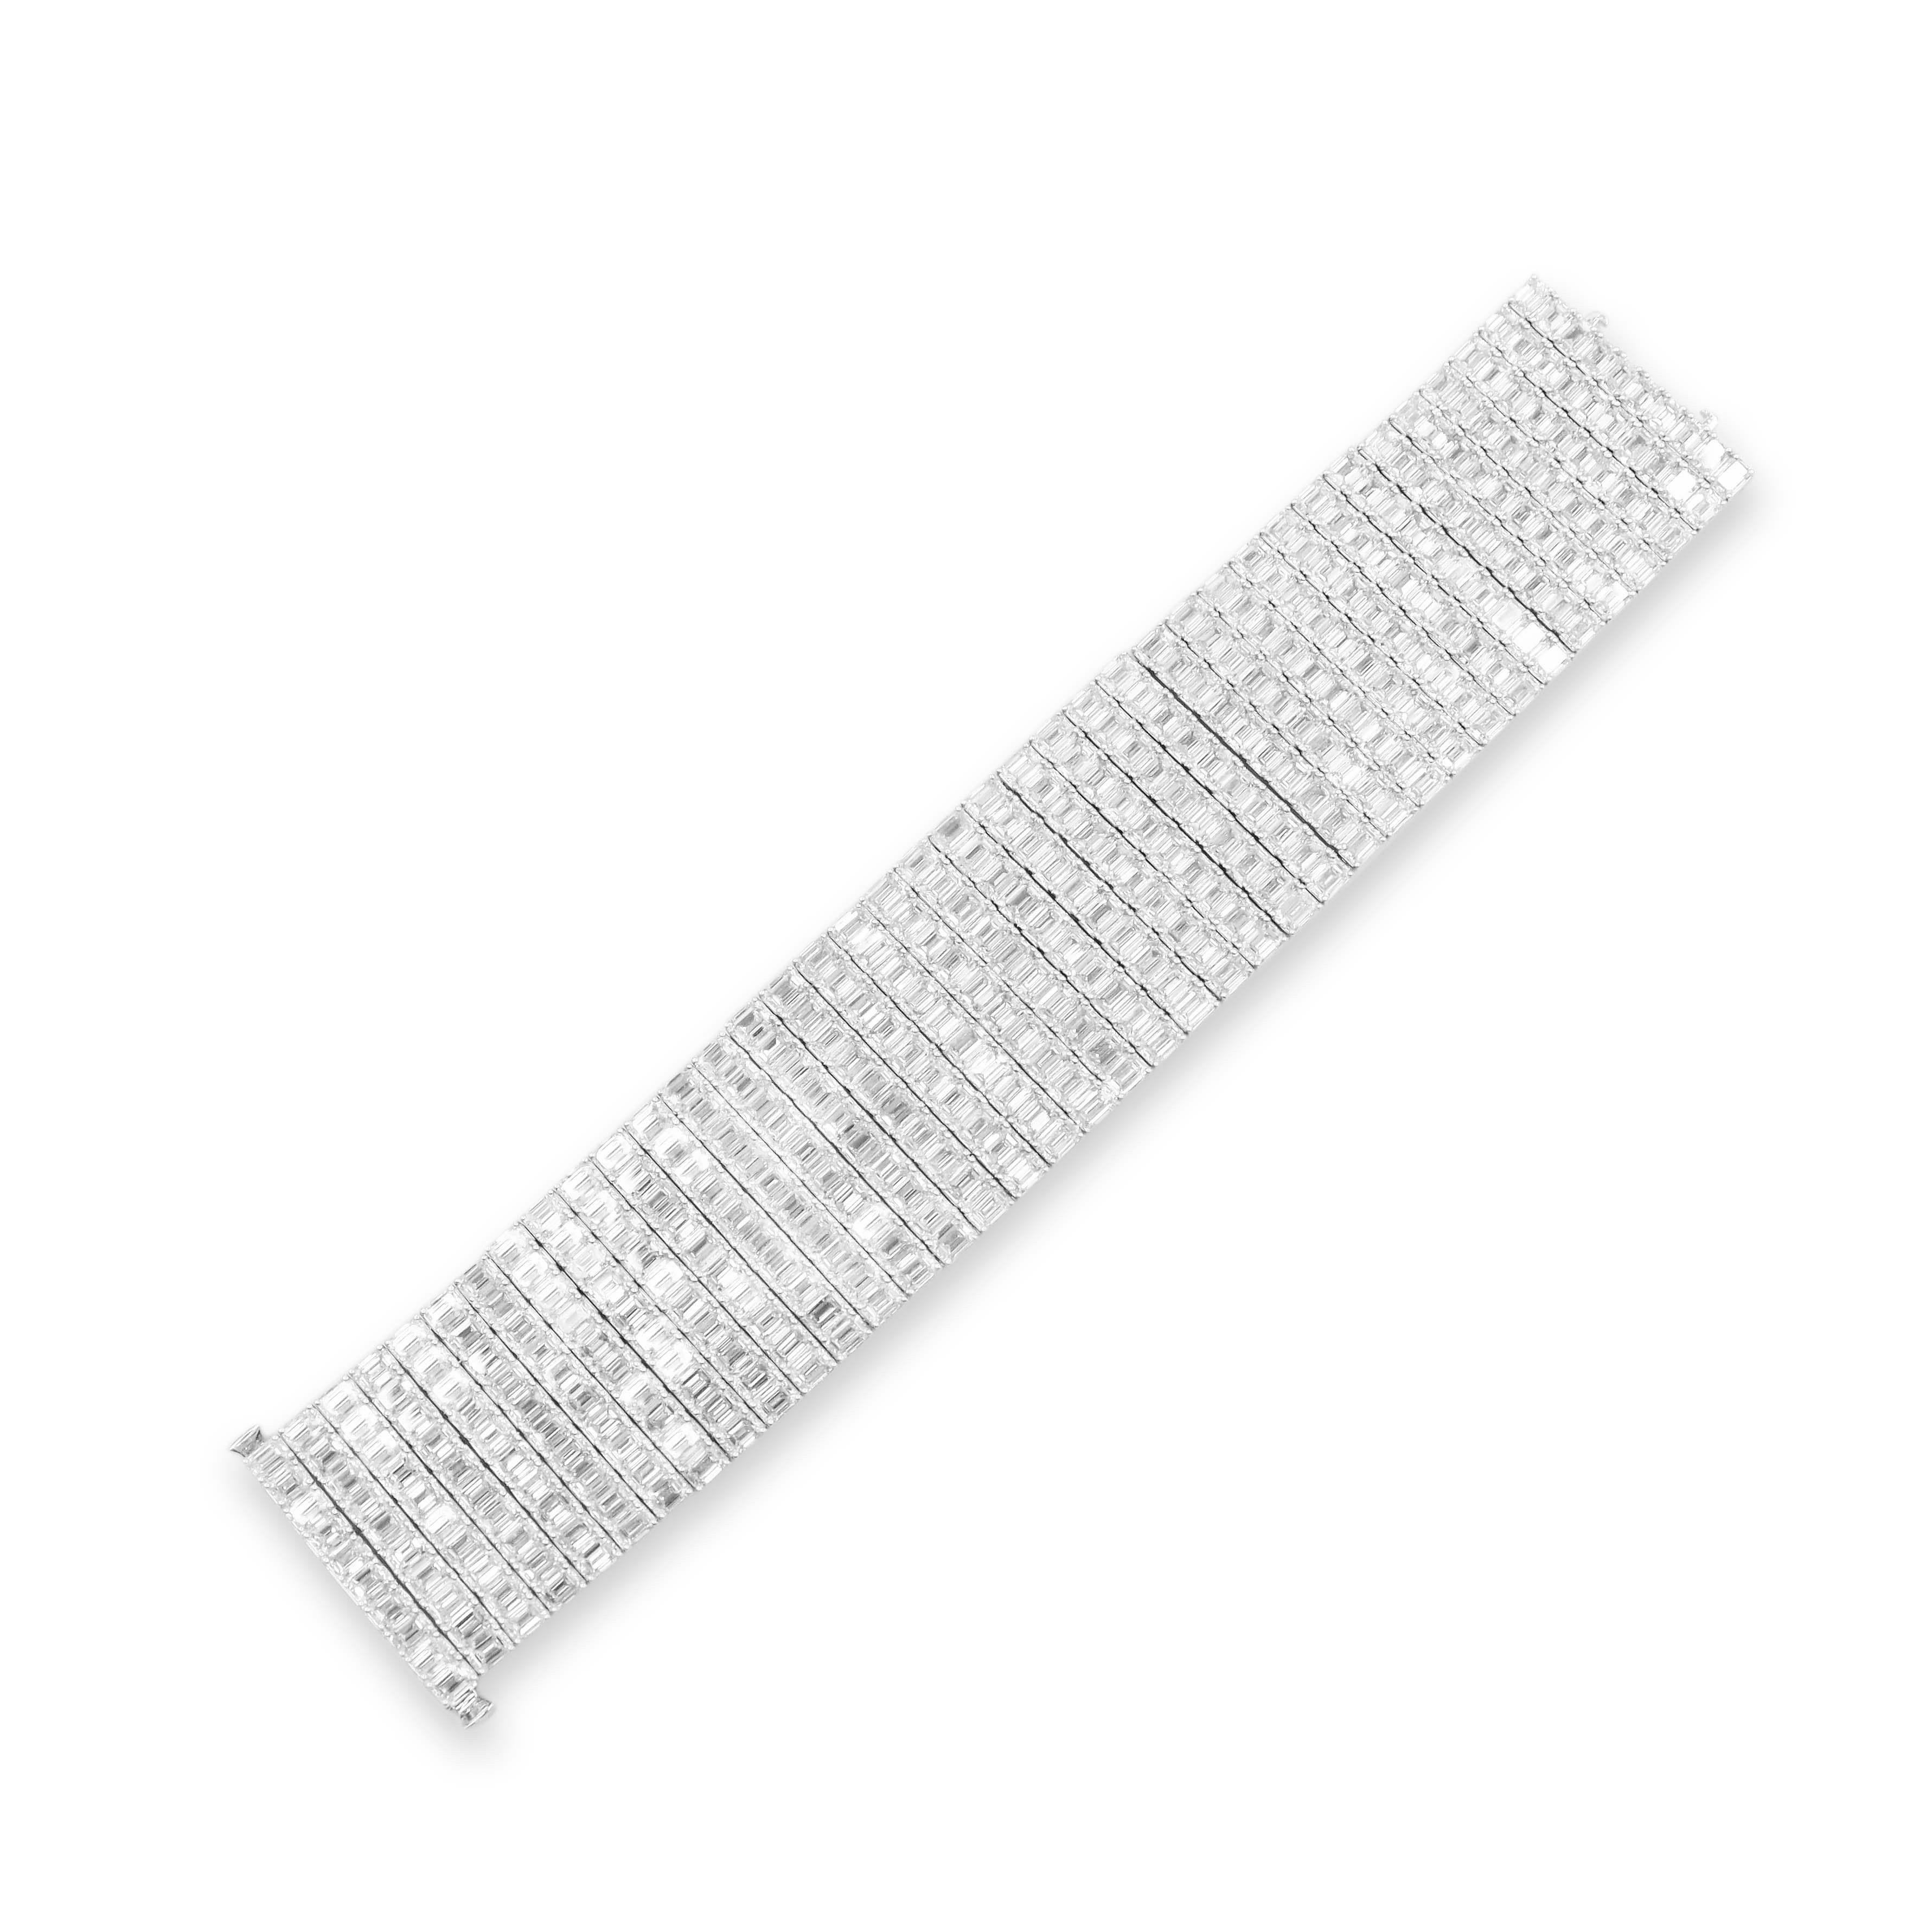 From Emilio Jewelry, a well known and respected wholesaler/dealer located on New York’s iconic Fifth Avenue,
One of a kind Emerald Cut Natural diamond bracelet 10 rows of diamonds! 
Color Average Overall: F-G
Clarity Average Overall: Vs2
Total